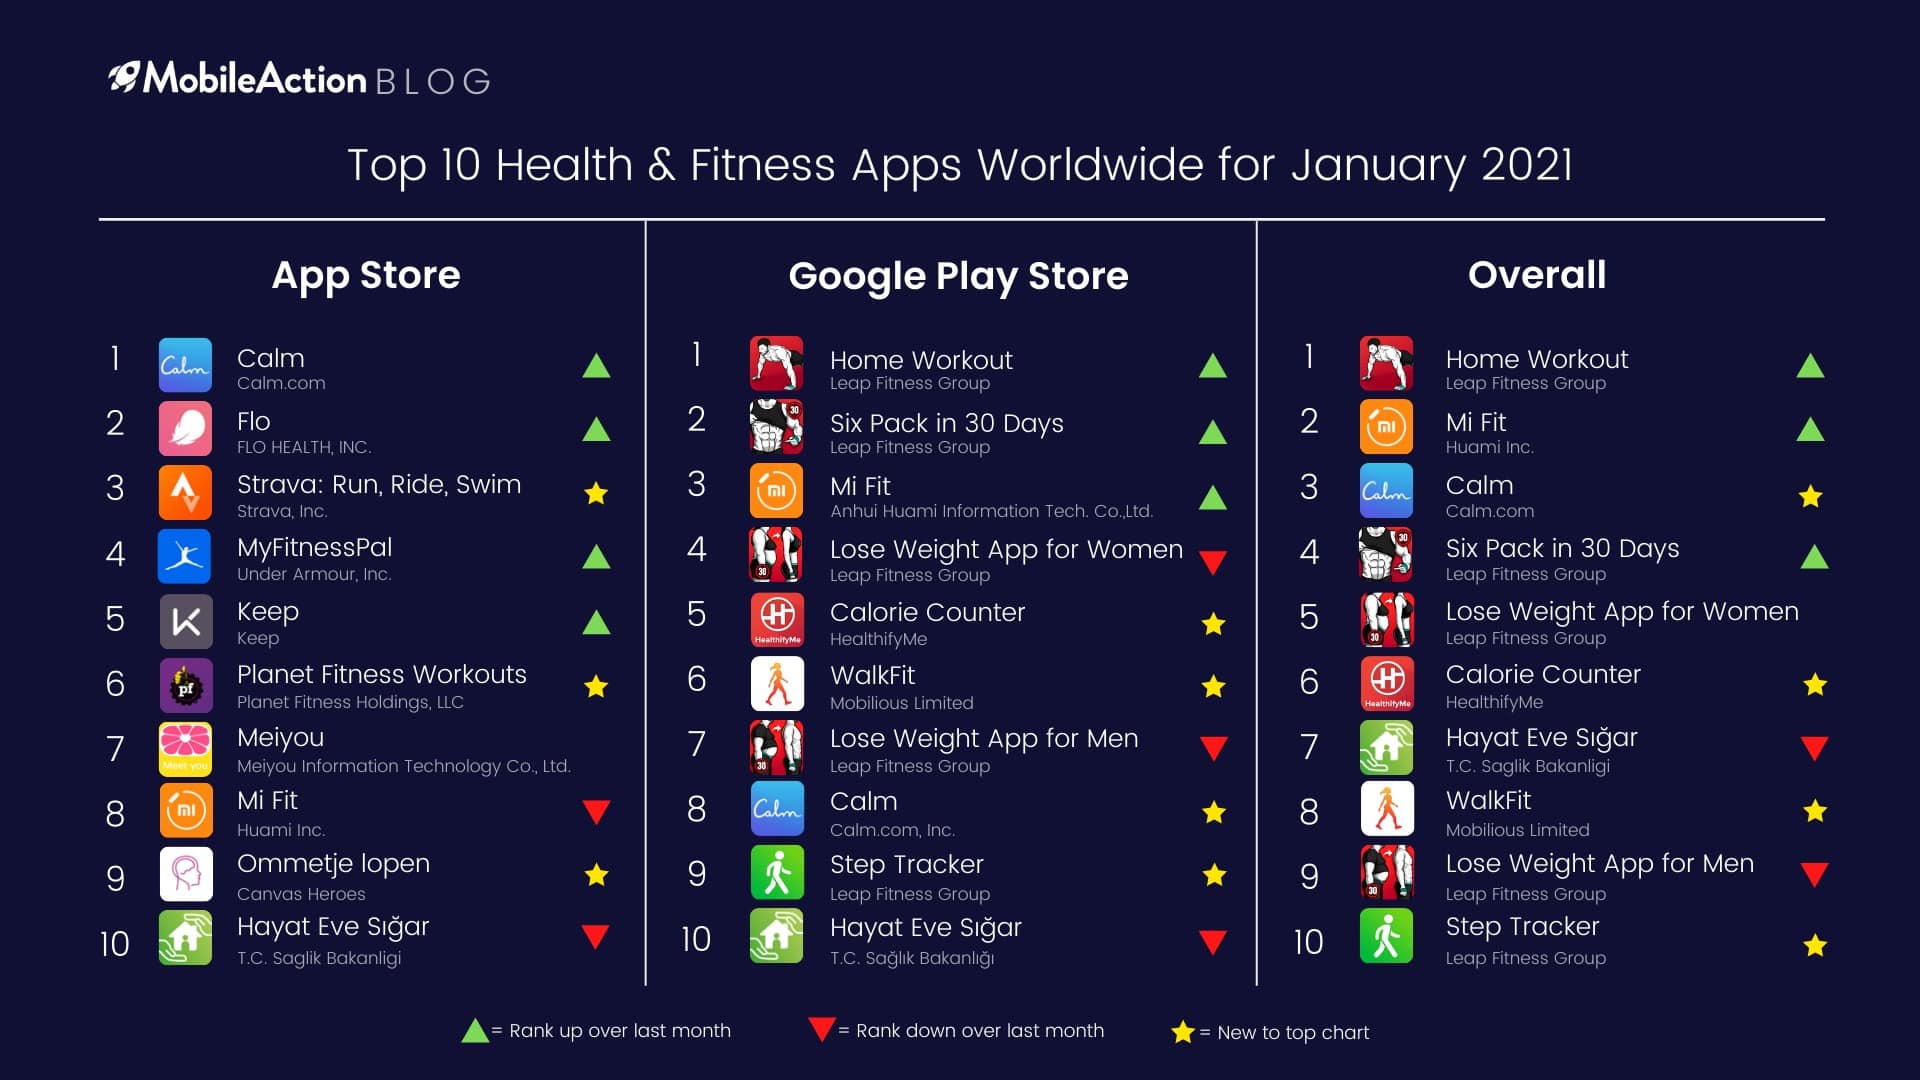 Top 10 Health and Fitness Apps for January 2021